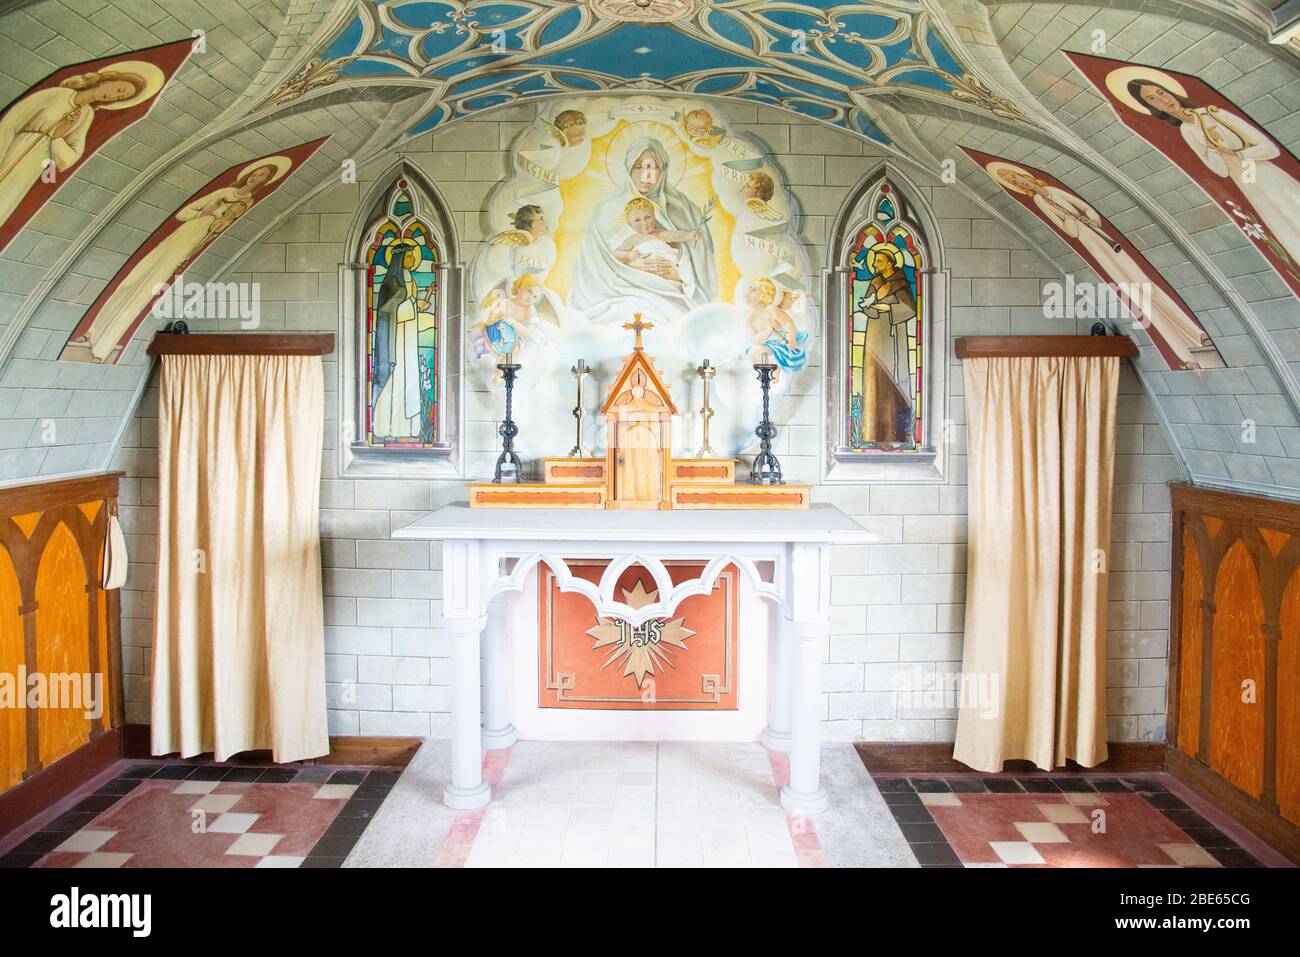 This Chapel was built by Italian Prisoners of War on an Orkney Island using a Nissan hut painted inside and outside. They also added church features. Stock Photo